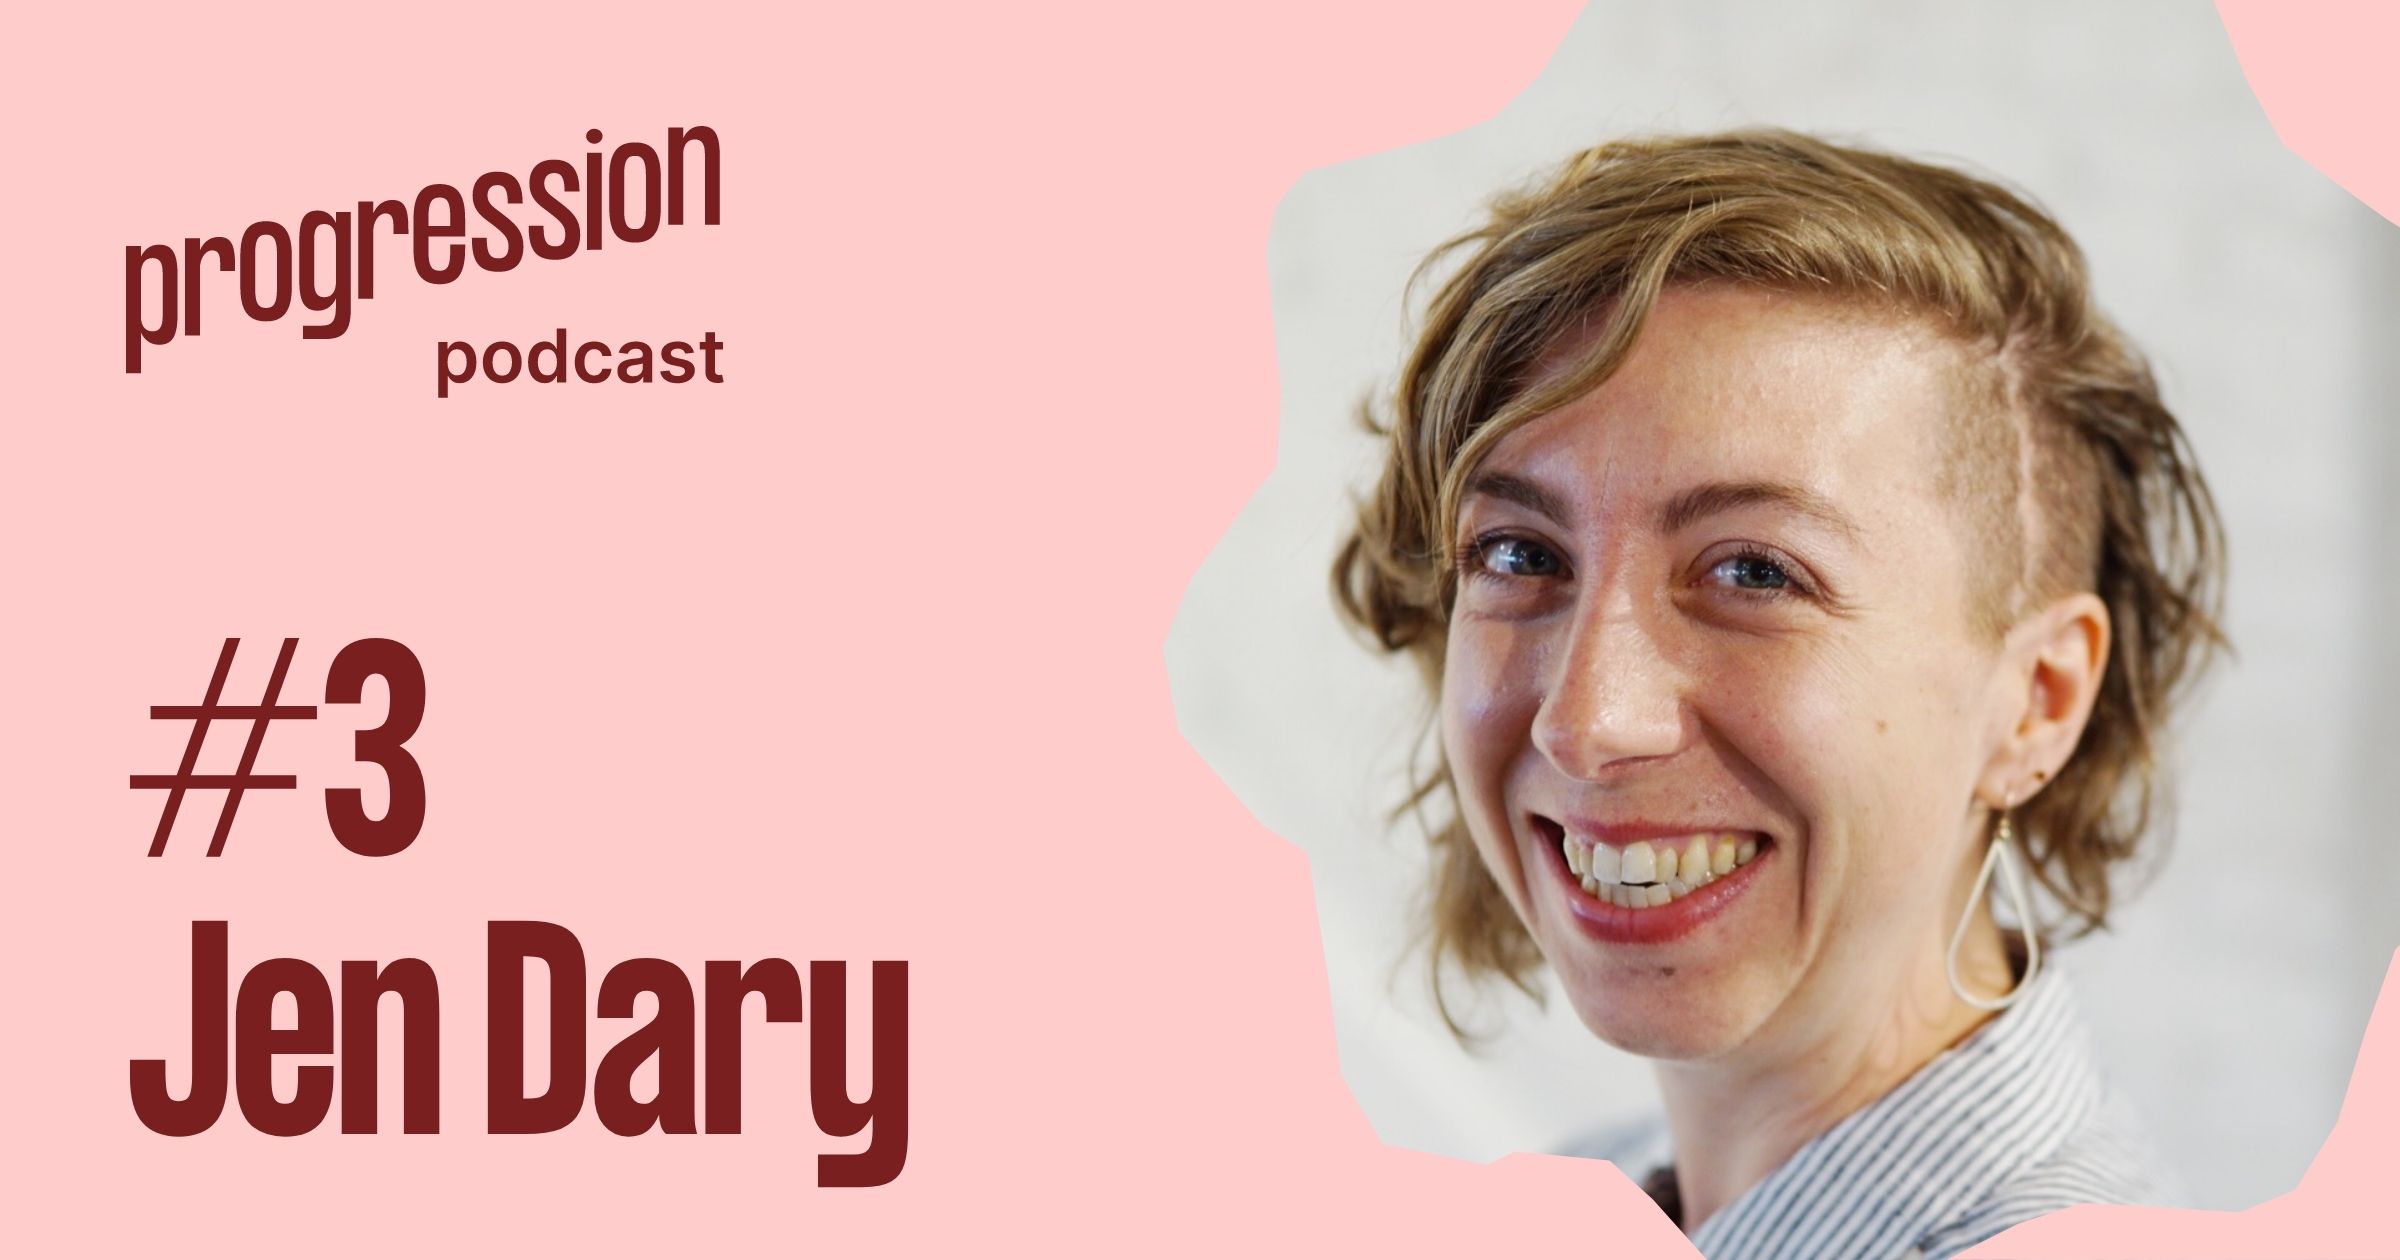 Podcast #3: Jen Dary on Becoming a Manager and Taking a Break